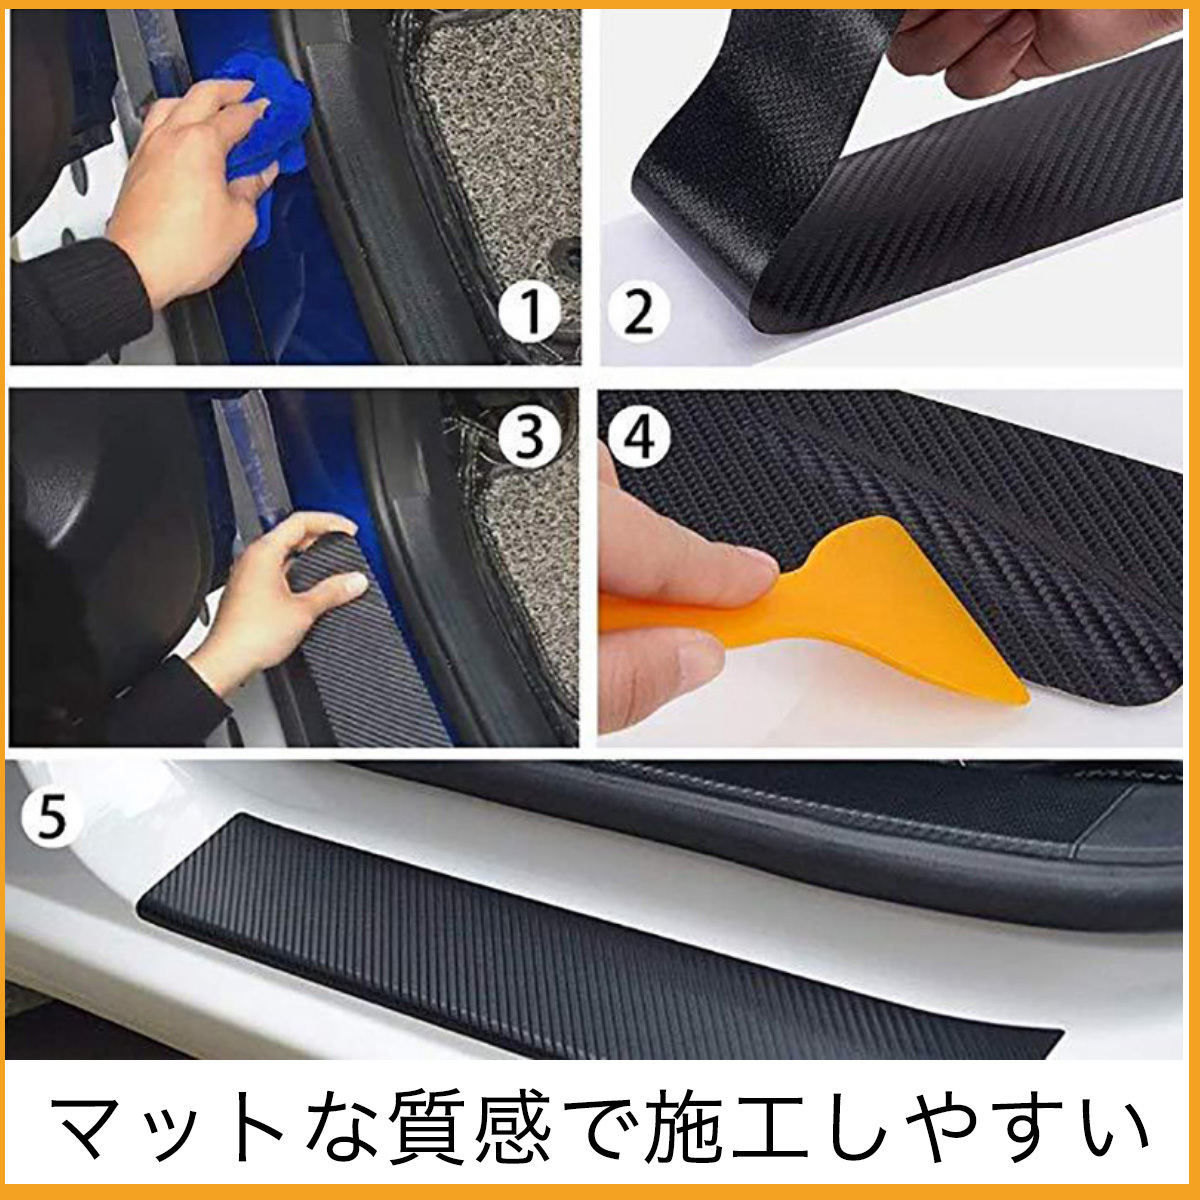  carbon style seat cutting sheet 5cm width 50mm car car bike 3D interior exterior tape ornament mat matted black black wrapping 